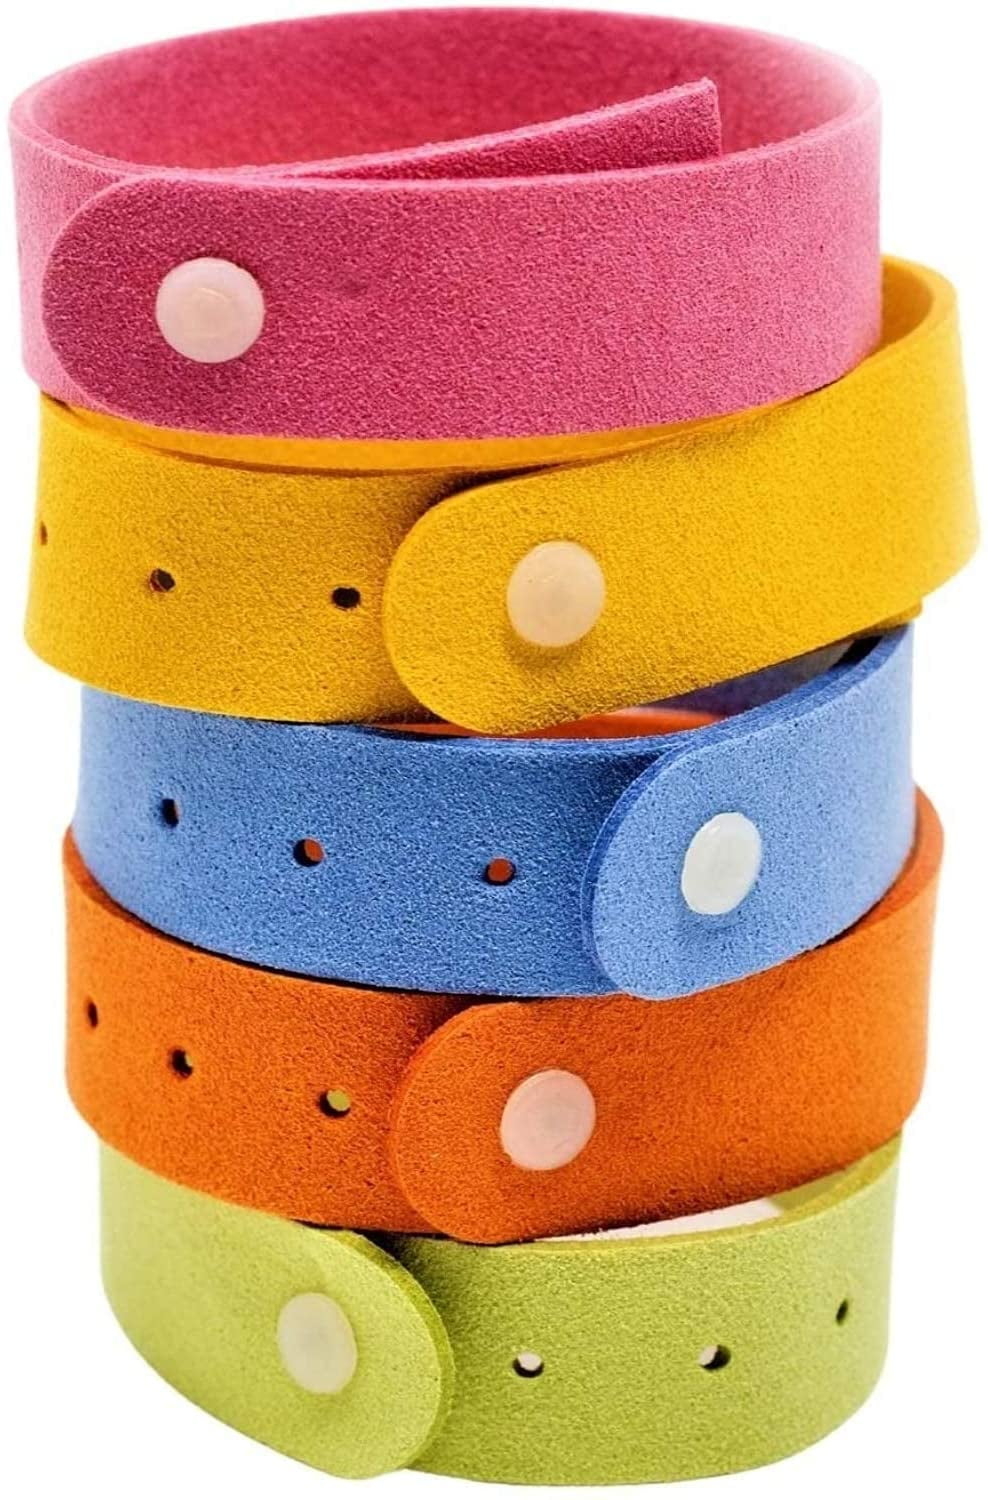 Shields Mosquito Repellent Bracelet 5 Pack Deet Free Refillable and Reusable 